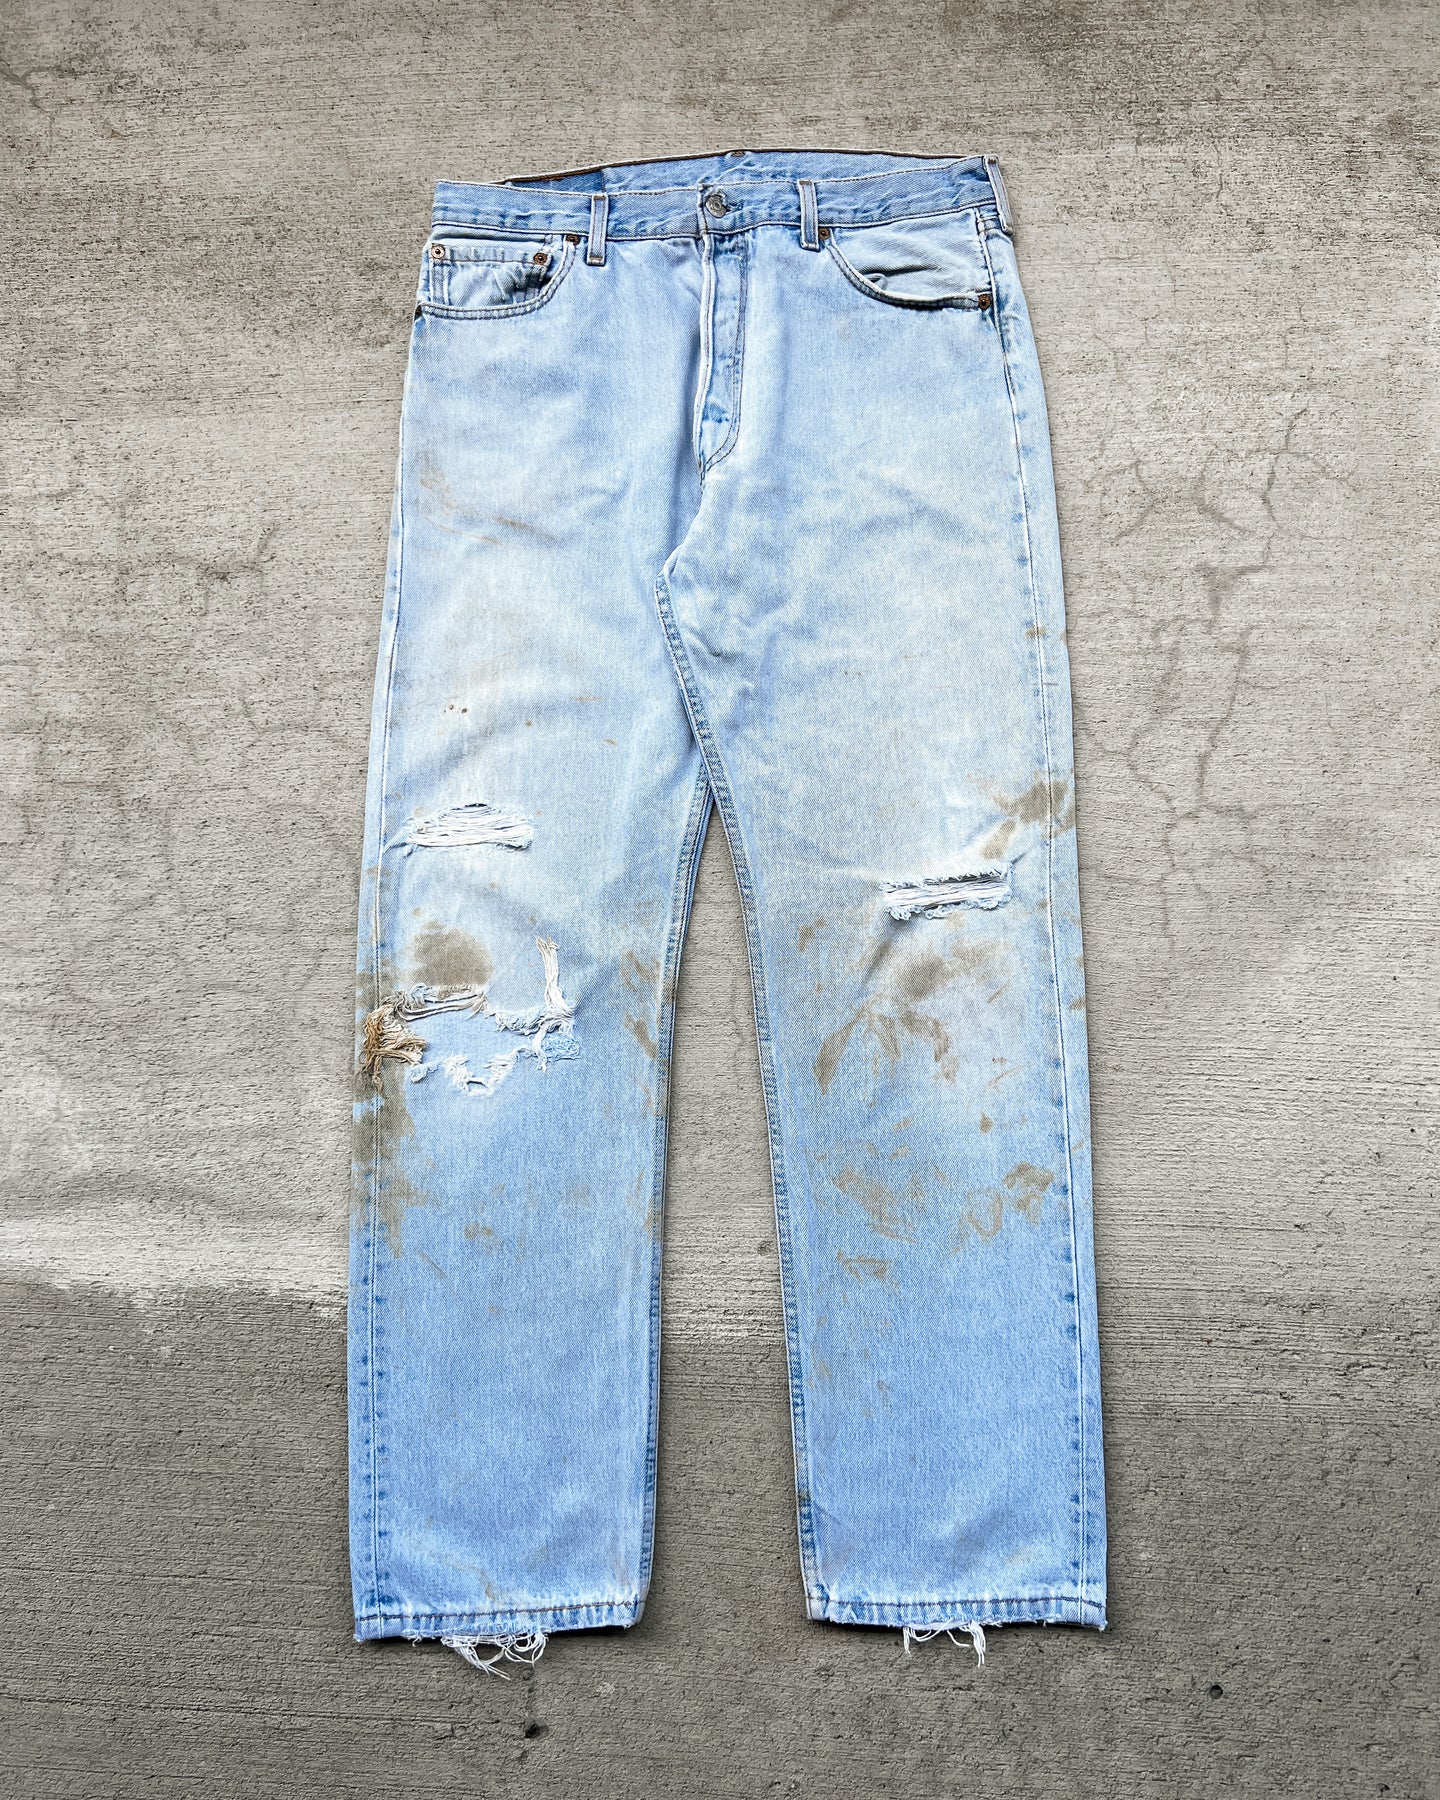 1990s Levi's Light Wash Thrashed and Stained 501 - Size 34 x 31